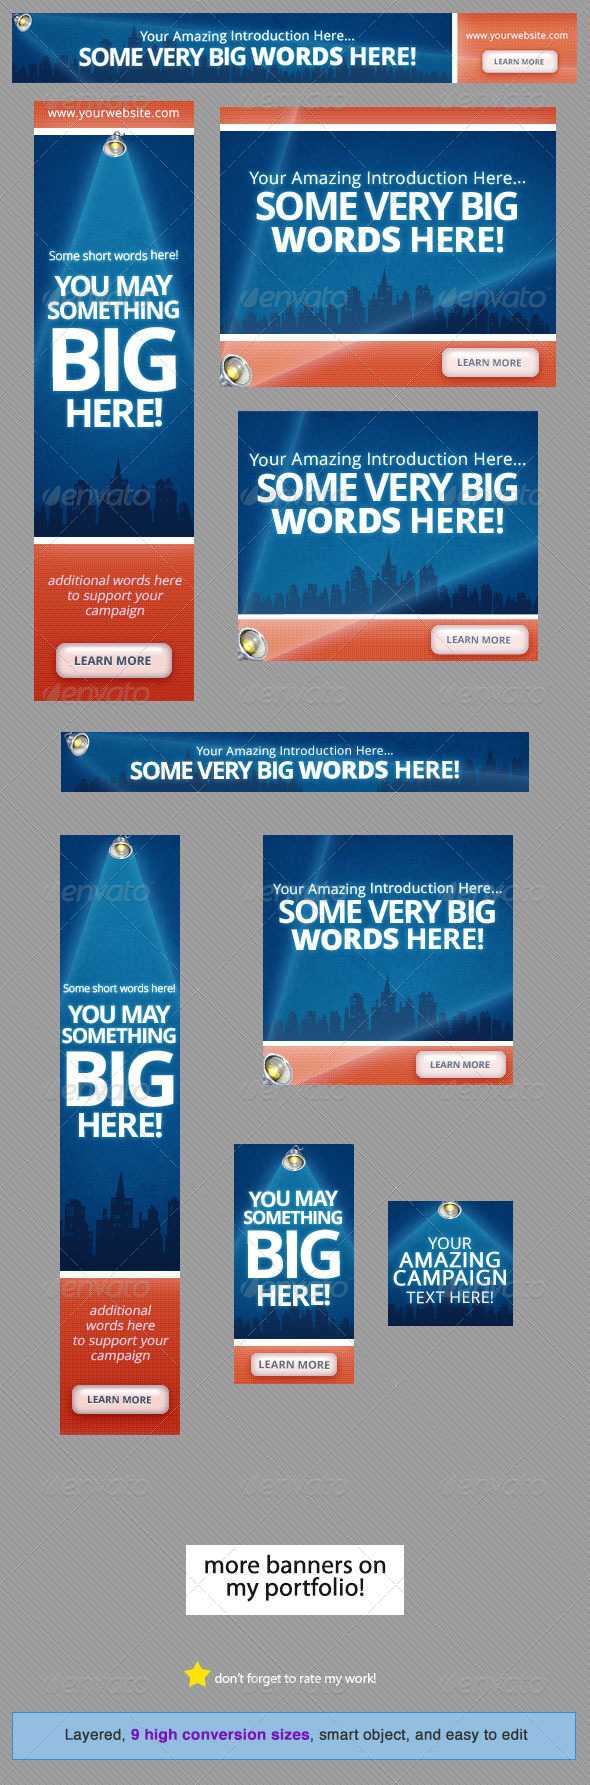 Banner Design Graphics, Designs & Templates From Graphicriver Intended For Free Online Banner Templates